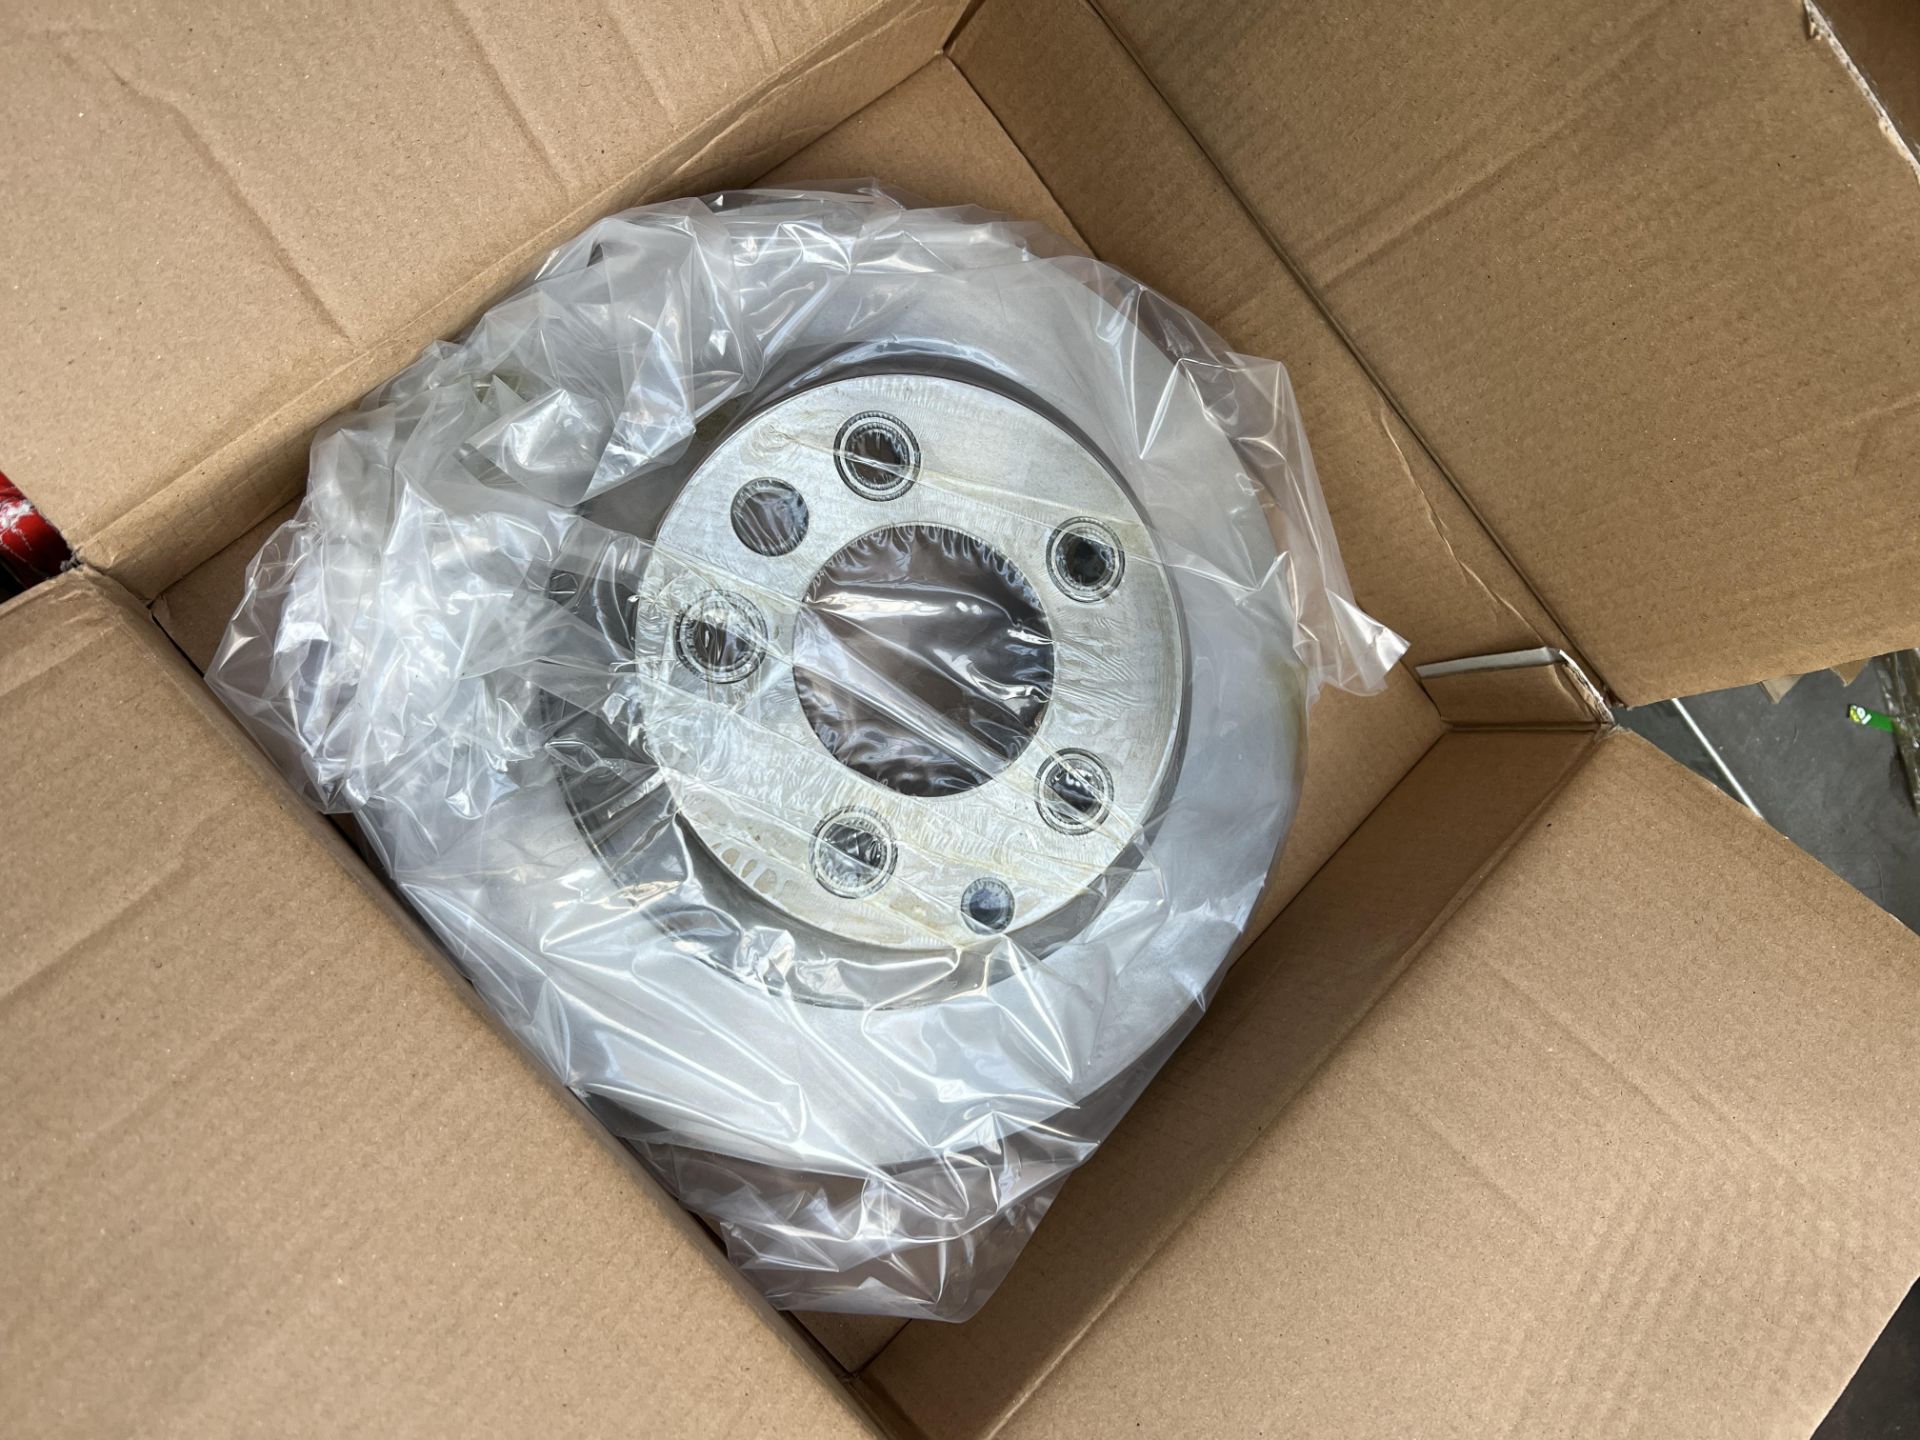 10: Boxed Unipart Vented Rear DSK2284 Brake Discs Audi Q7, VW Touareg and Porsche Cayenne Models - Image 3 of 5